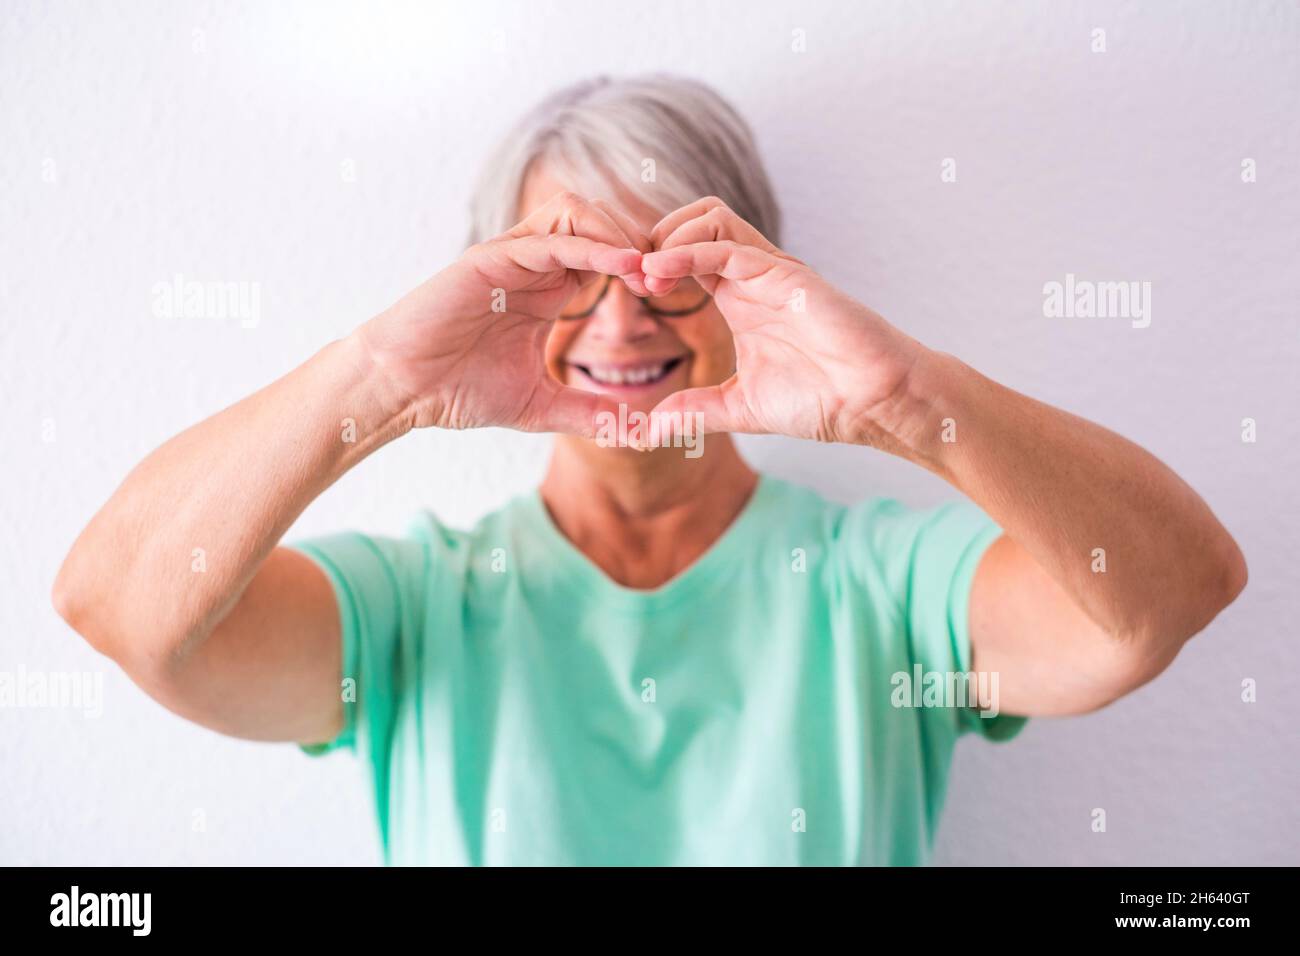 portrait of one mature and old woman showing to them camera a heart made with her hands smiling and having fun at home. female senior taking care and loving people Stock Photo